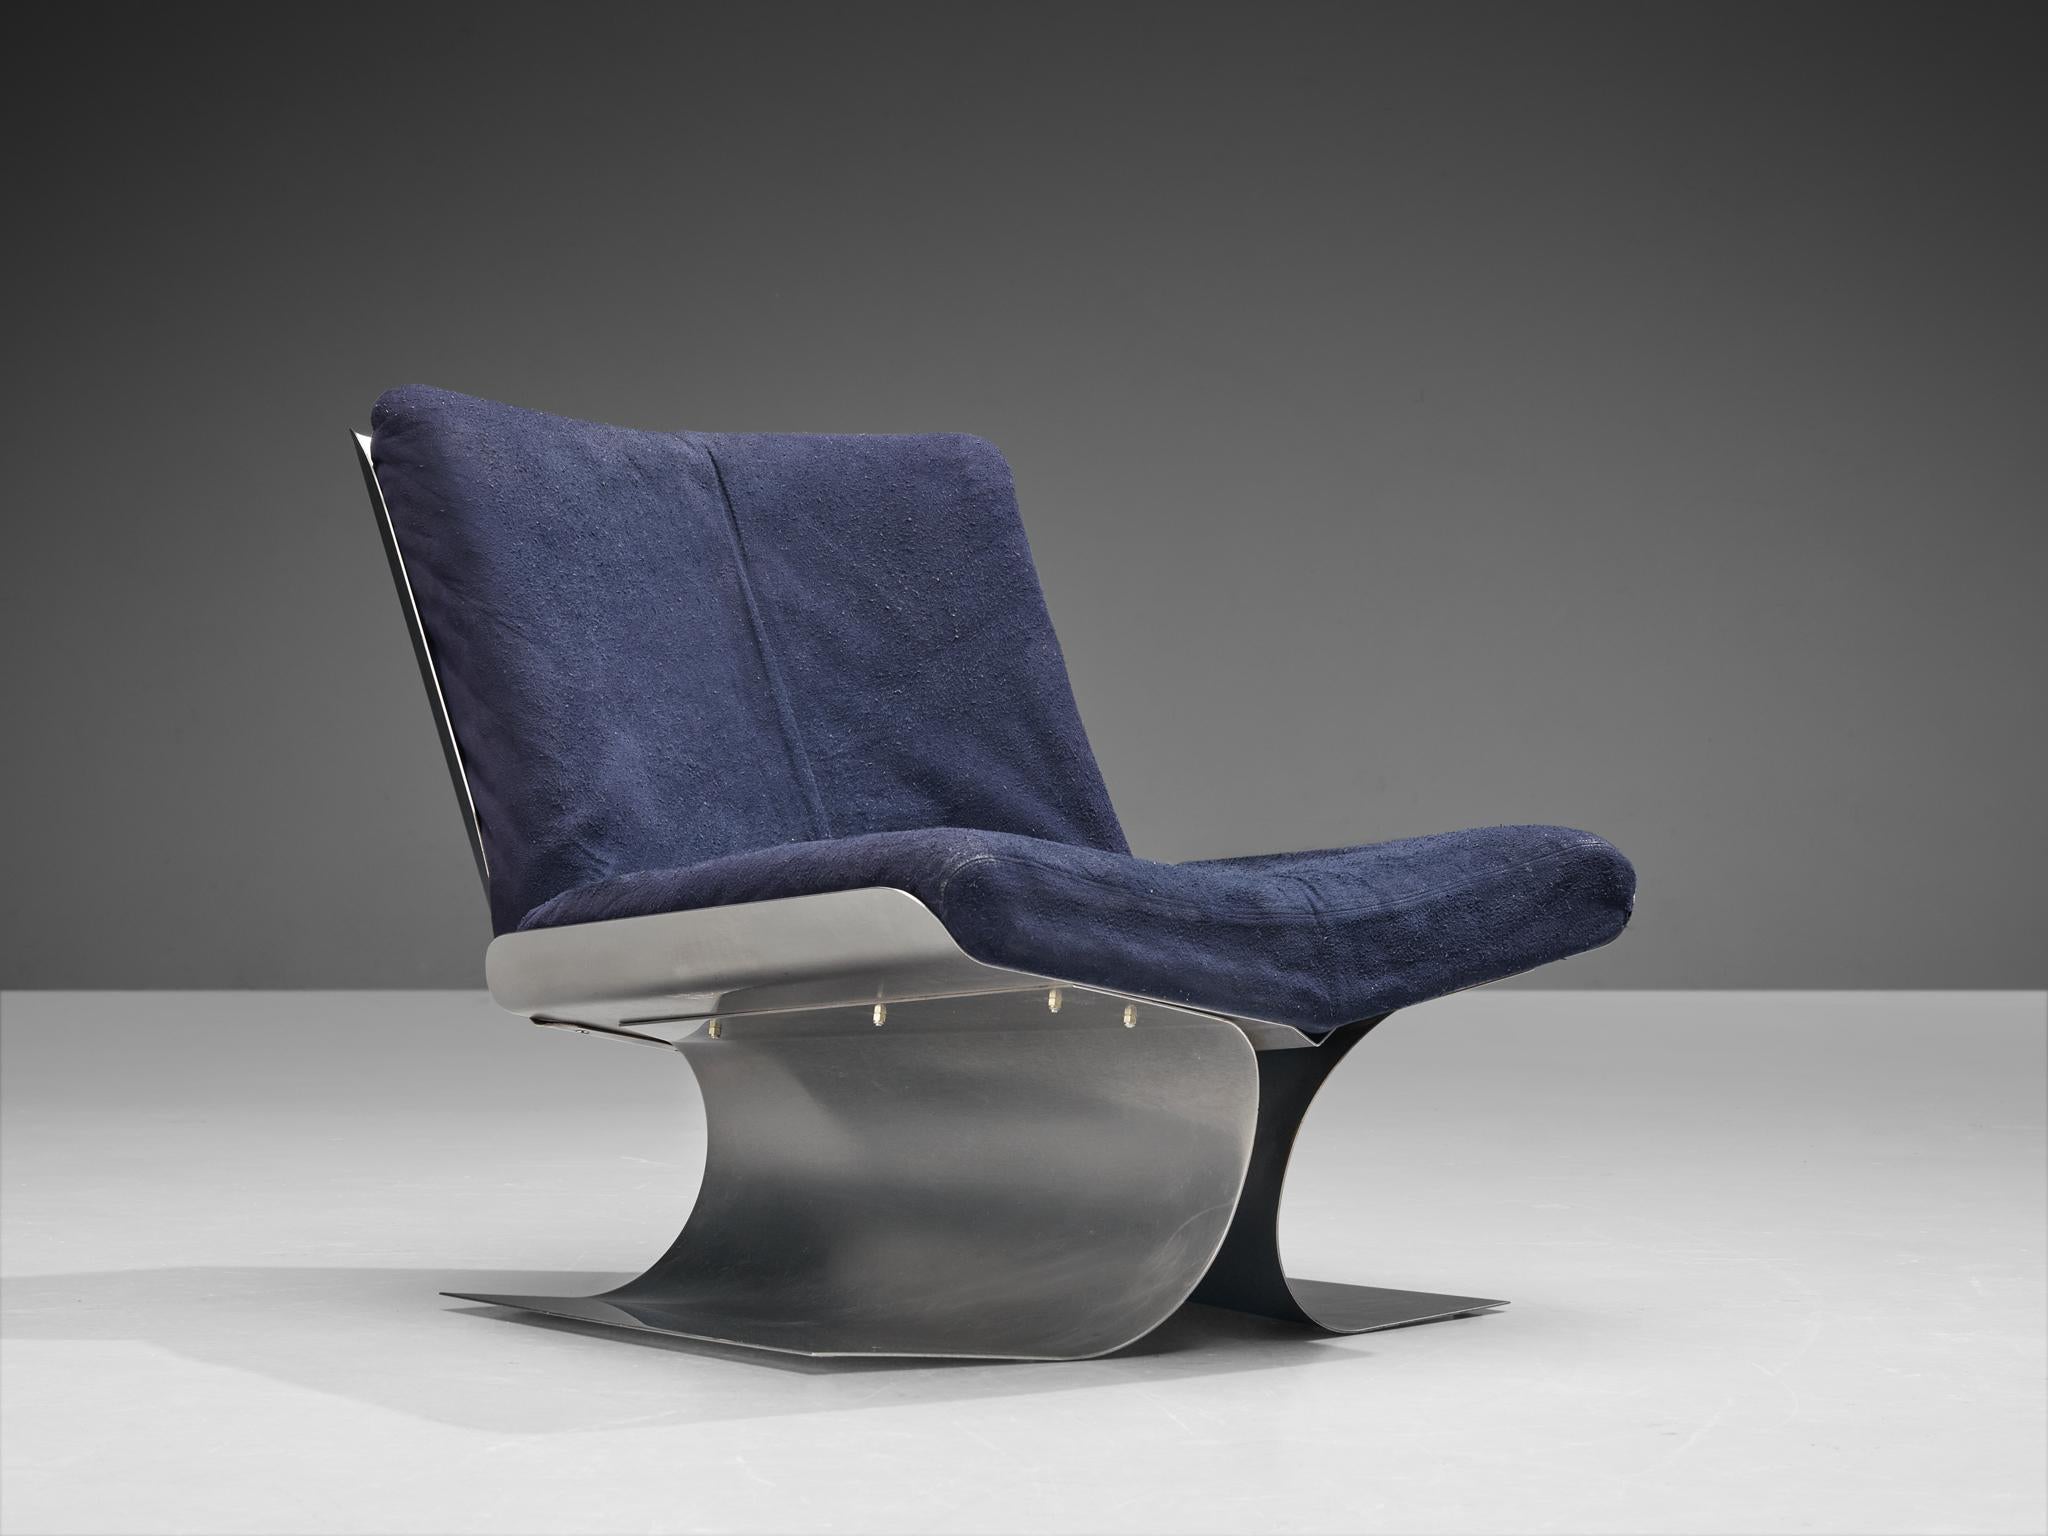 Xavier Féal, Lounge chair, brushed steel, fabric, France, ca. 1970

Rare lounge chair designed by French interior architect Xavier Féal in the 1970s. The smooth and sculptural chair is made of brushed steel, Féals signature material. The base has a